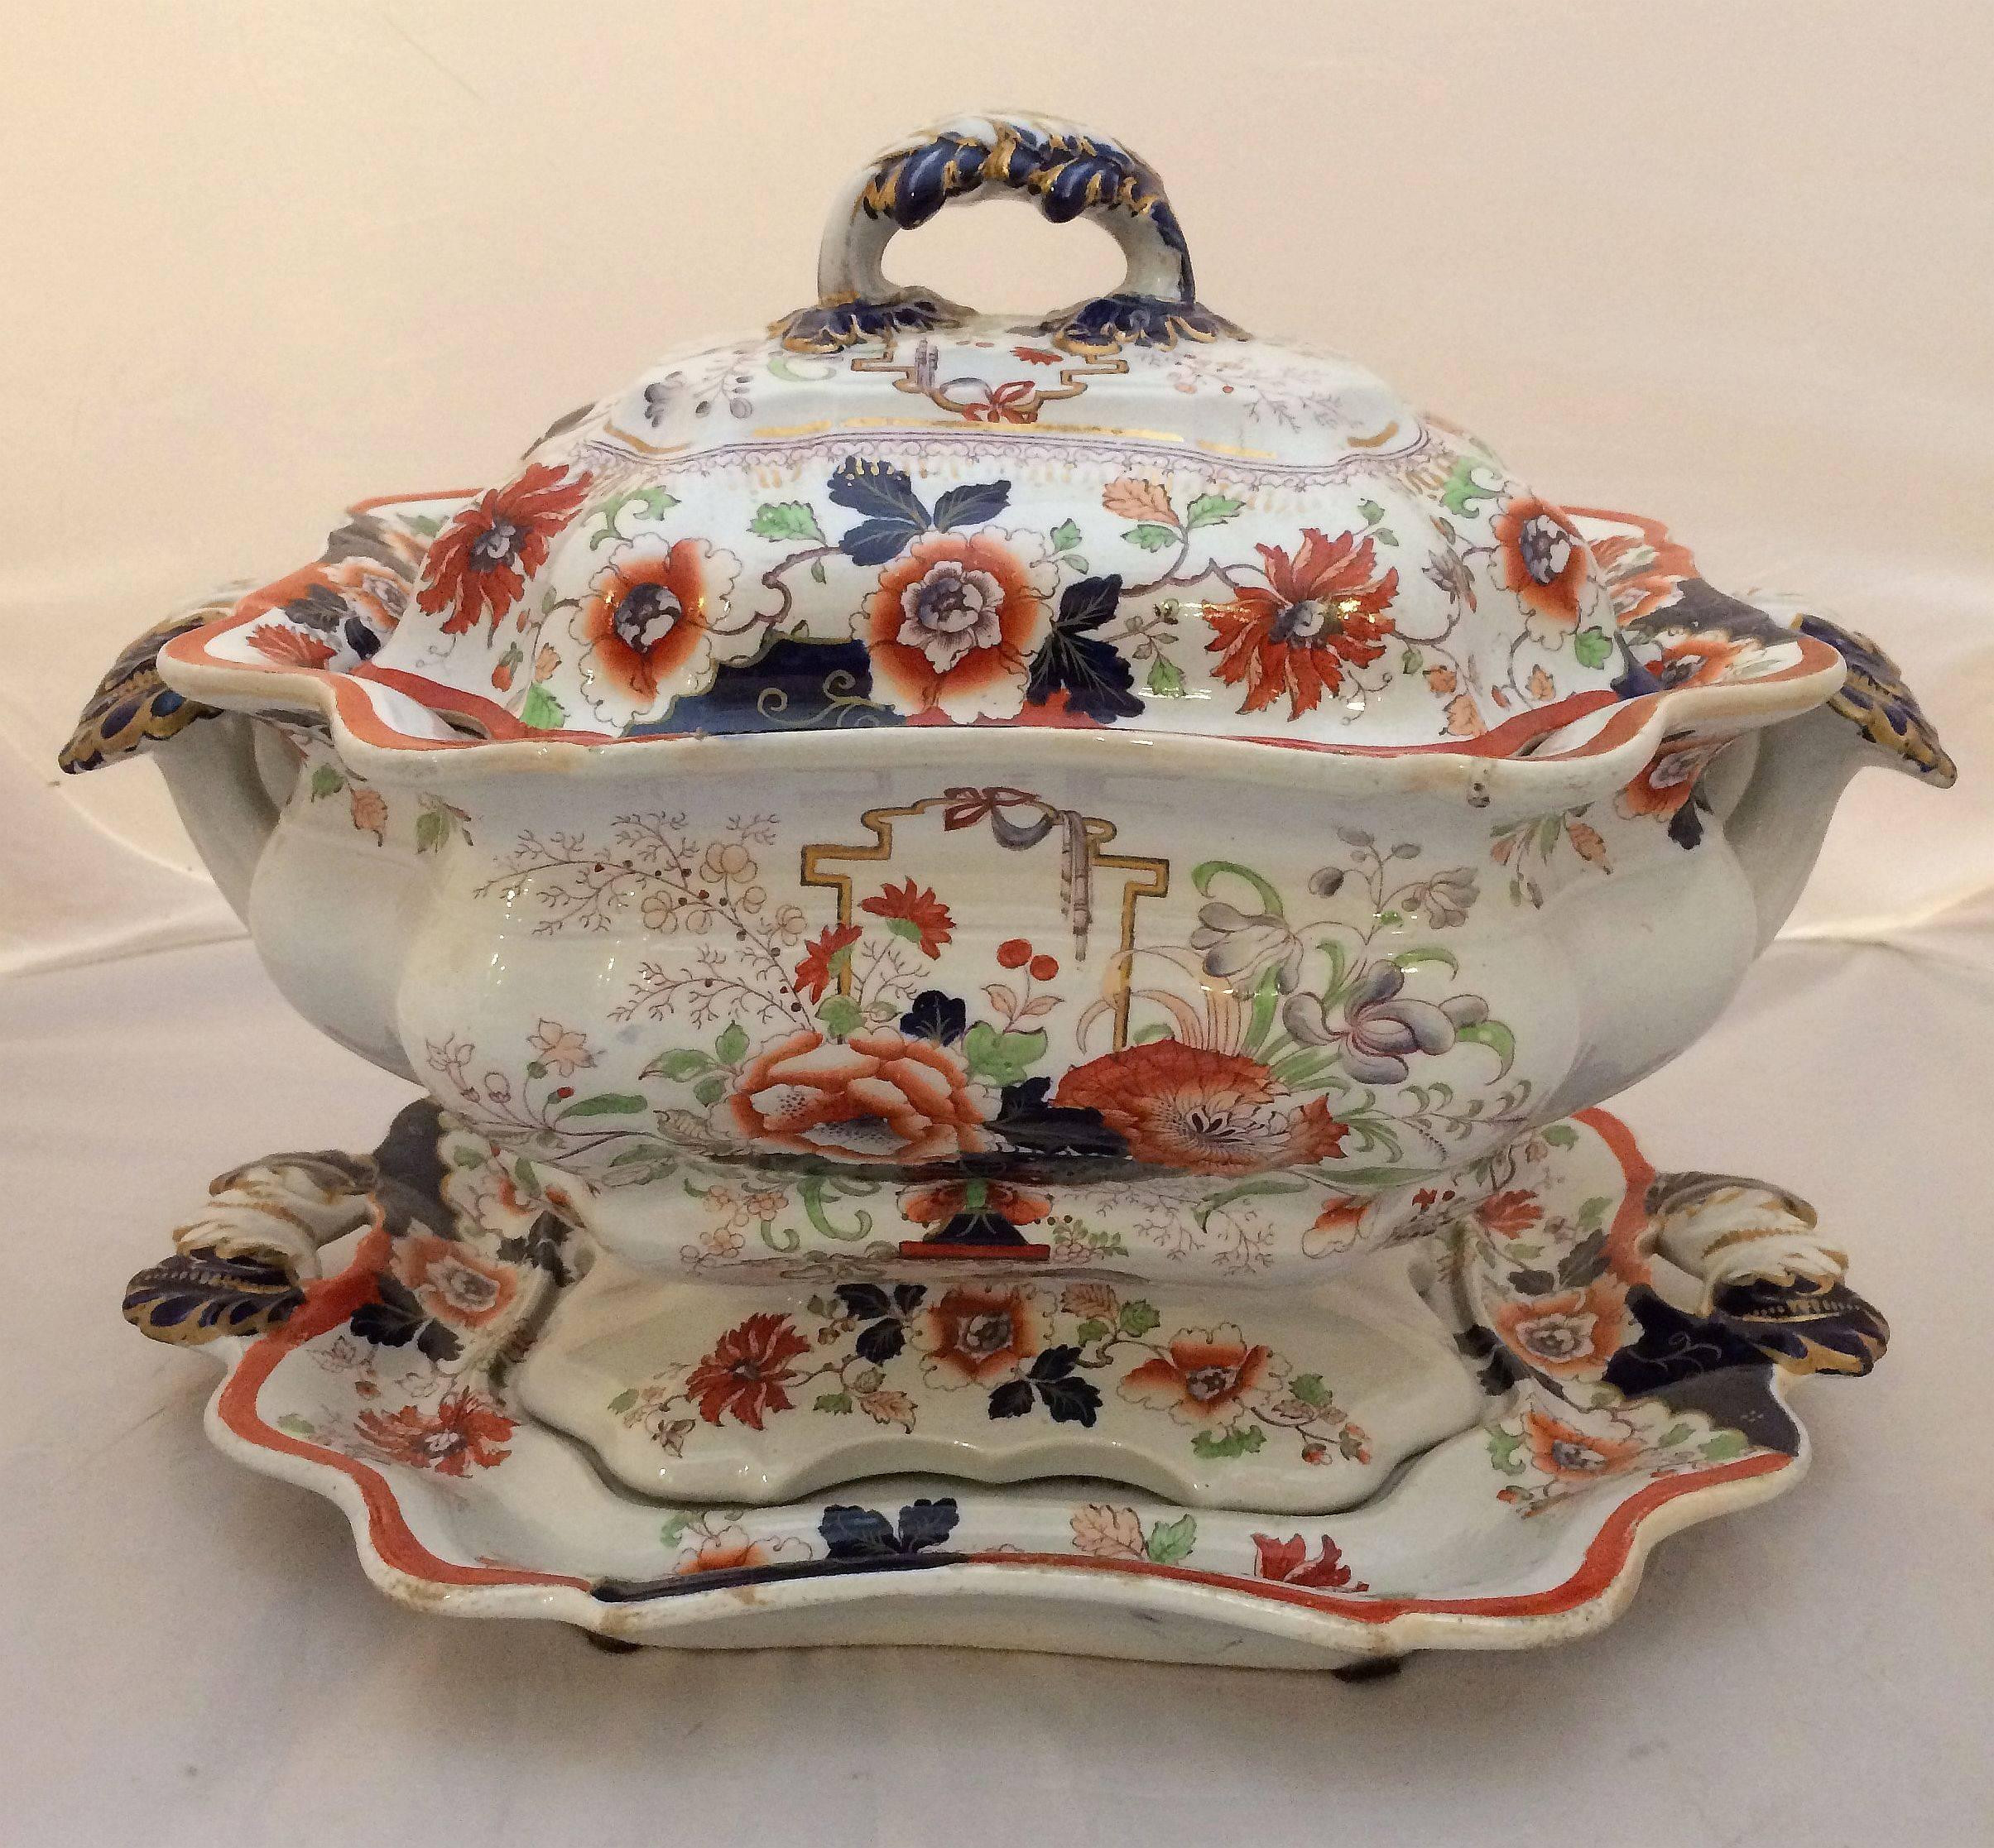 Glazed English Ironstone Tureen with Lid and Under-Tray from the Early 19th Century For Sale